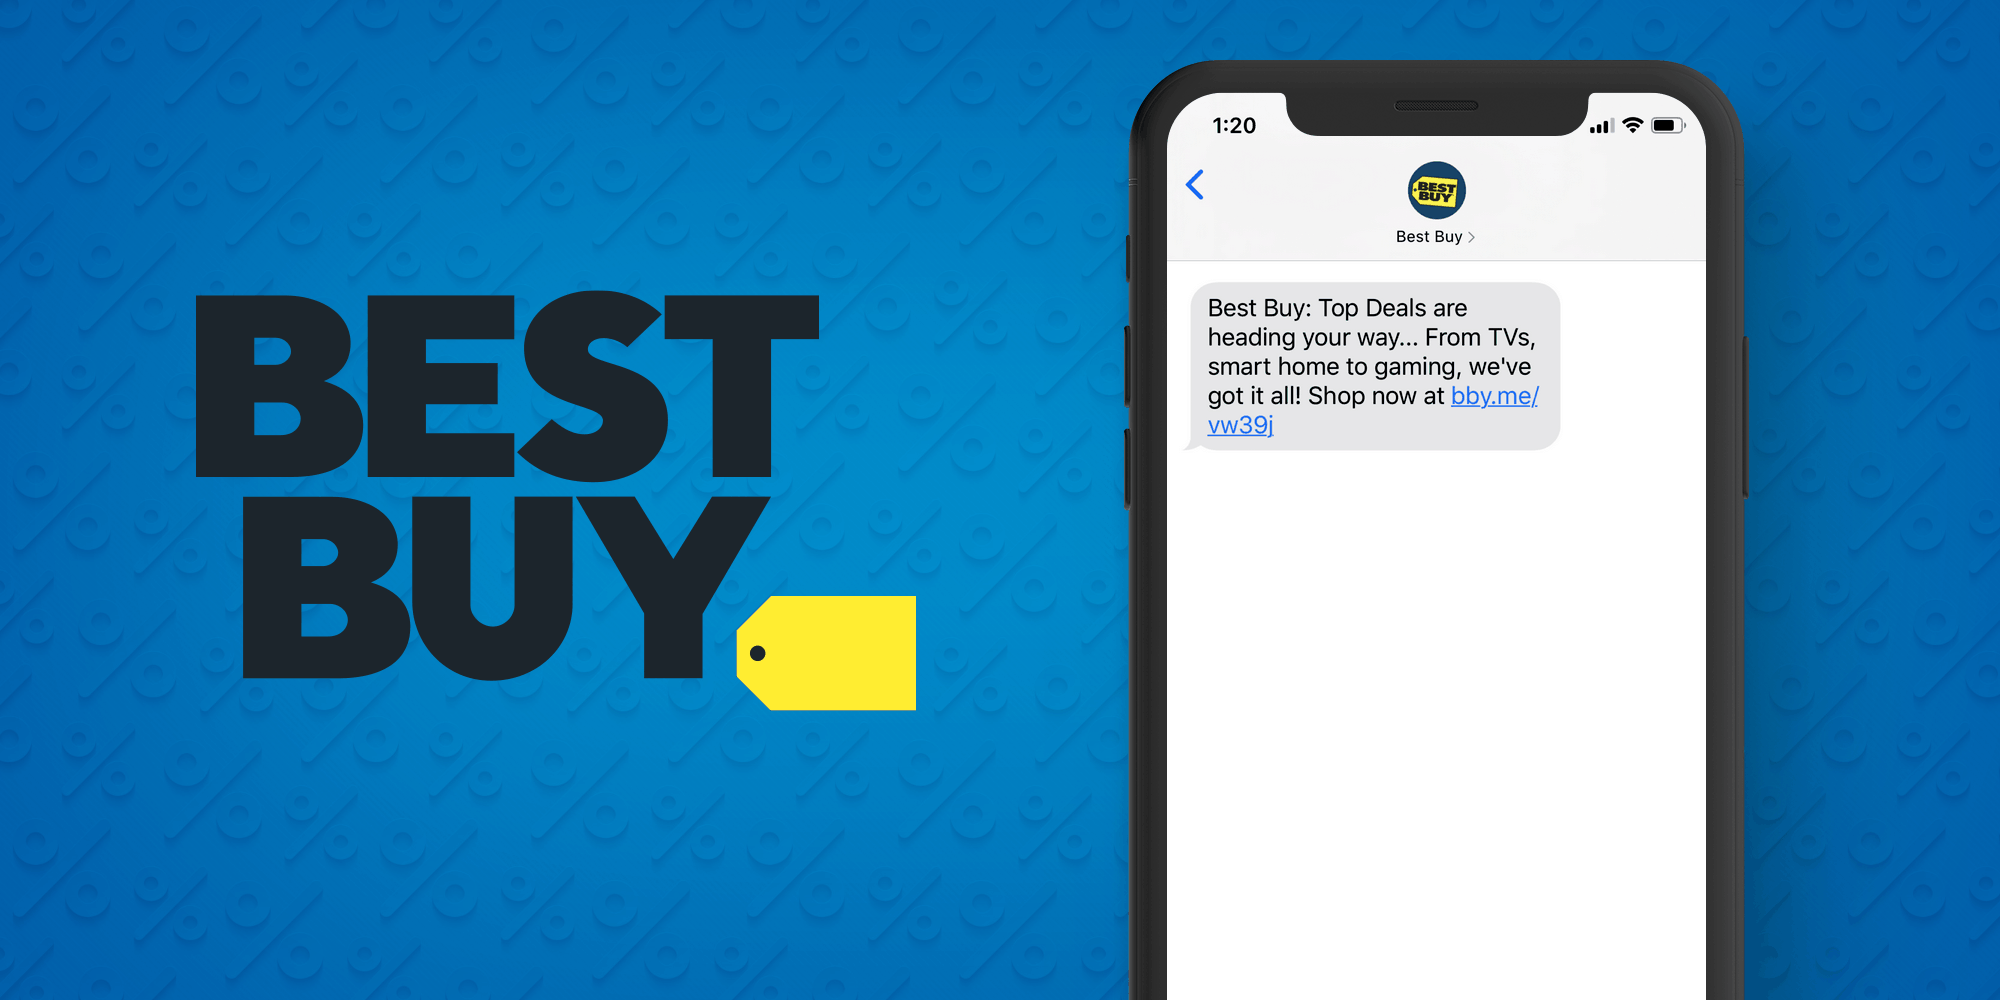 Best Buy SMS Marketing Example - 50 Examples of Brands Using SMS Marketing